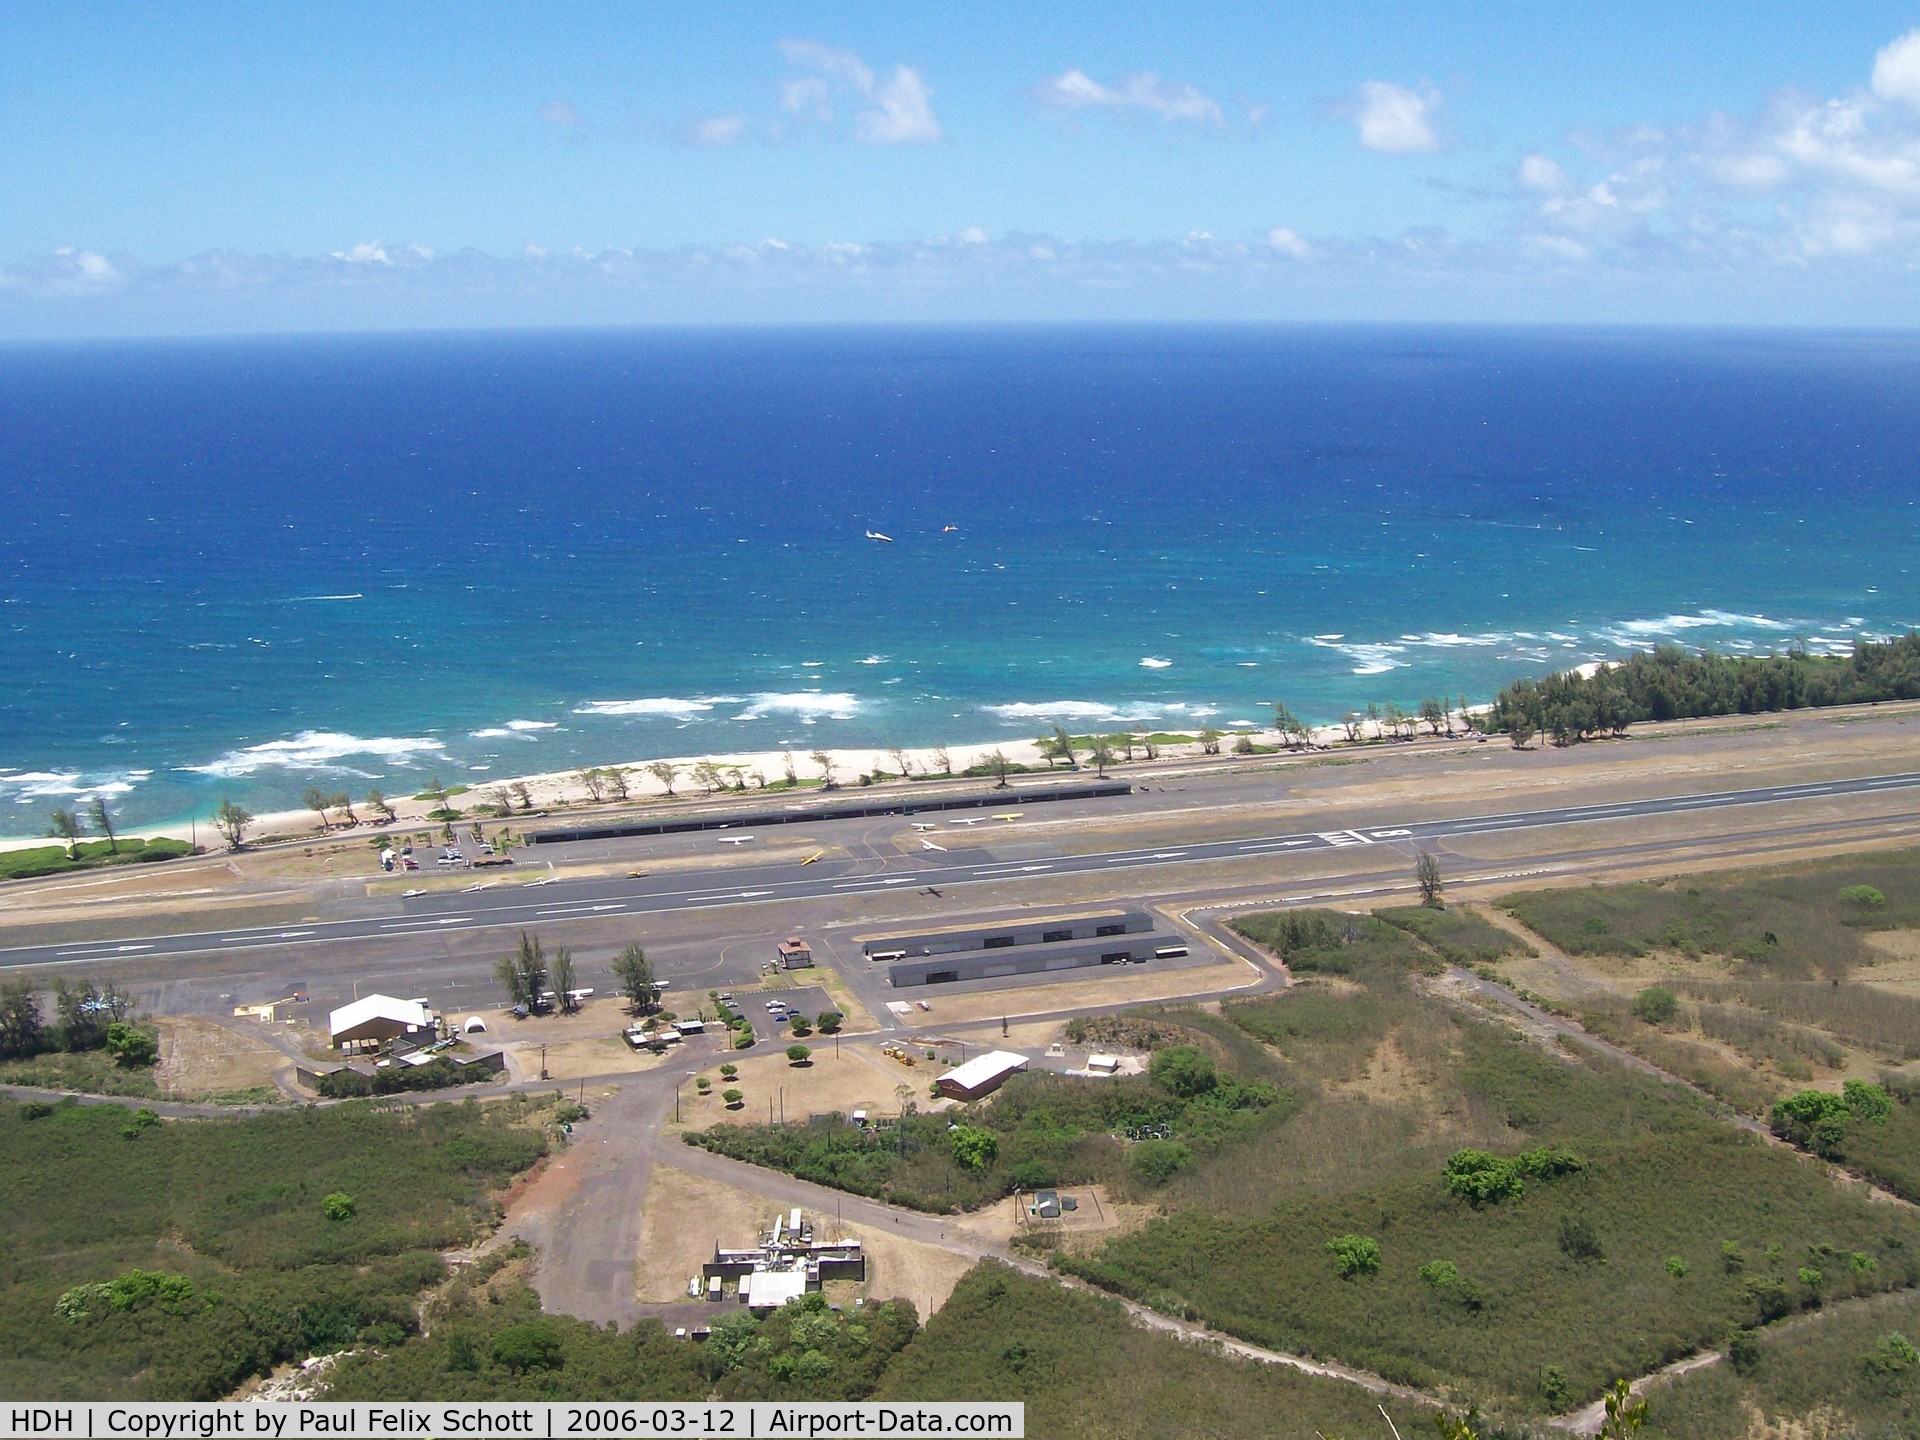 Dillingham Airfield Airport (HDH) - East end of the Dillingham runway looking North to the runway and out over the Pacific Ocean 